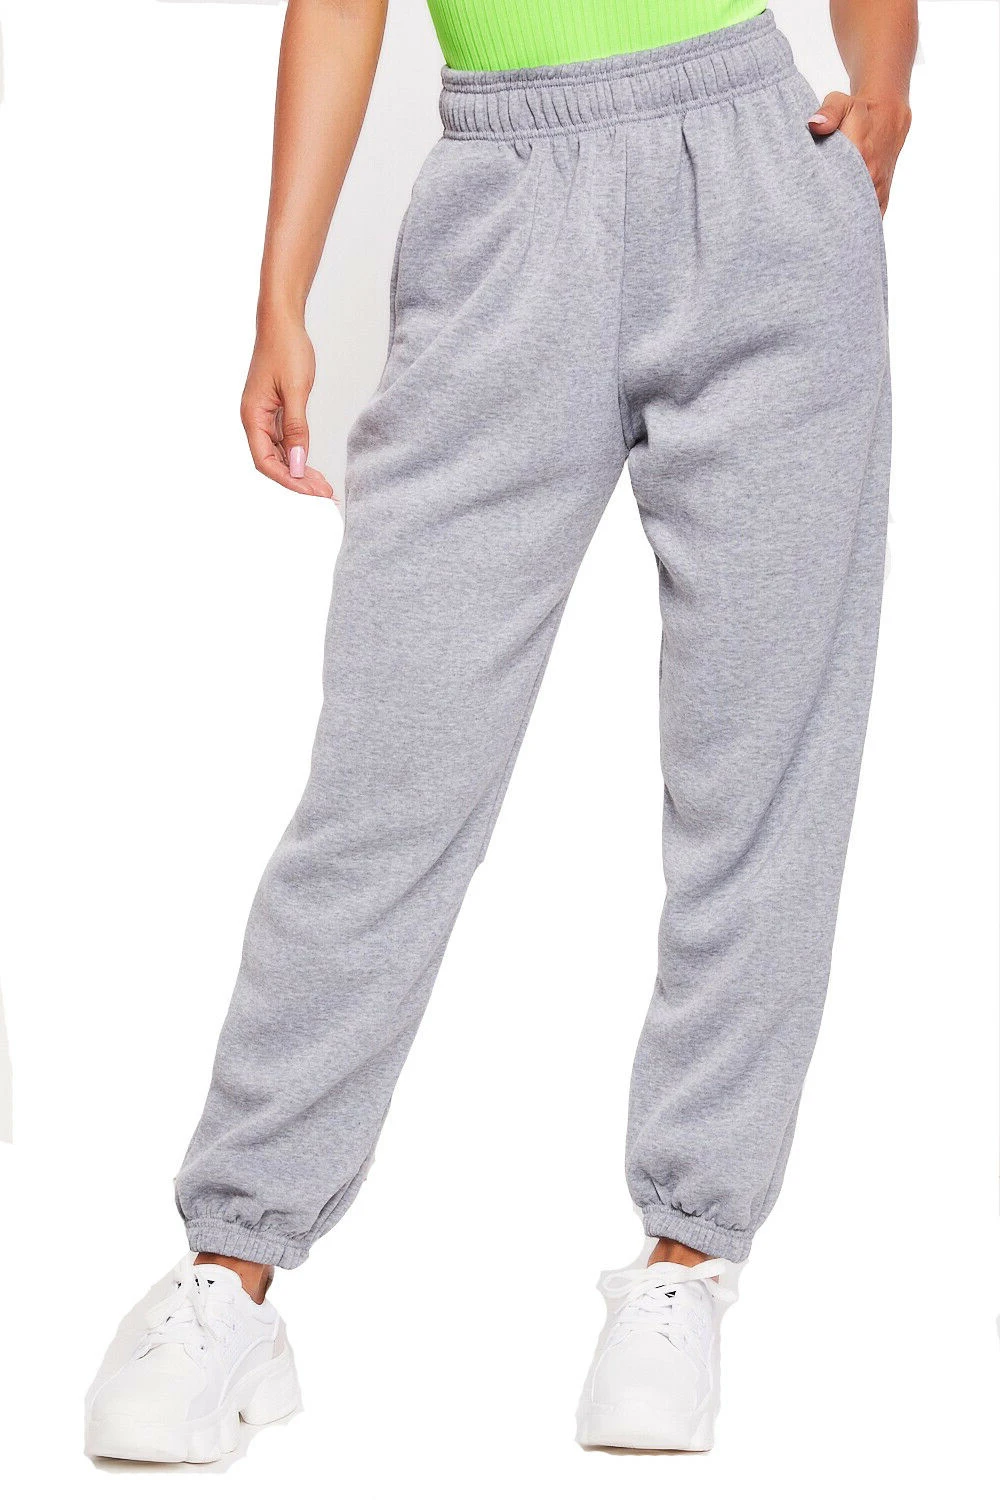 Baggy Sweatpants for Women High Waisted Joggers with Pockets Cinch Bottom Workout Athletic Lounge Pants 